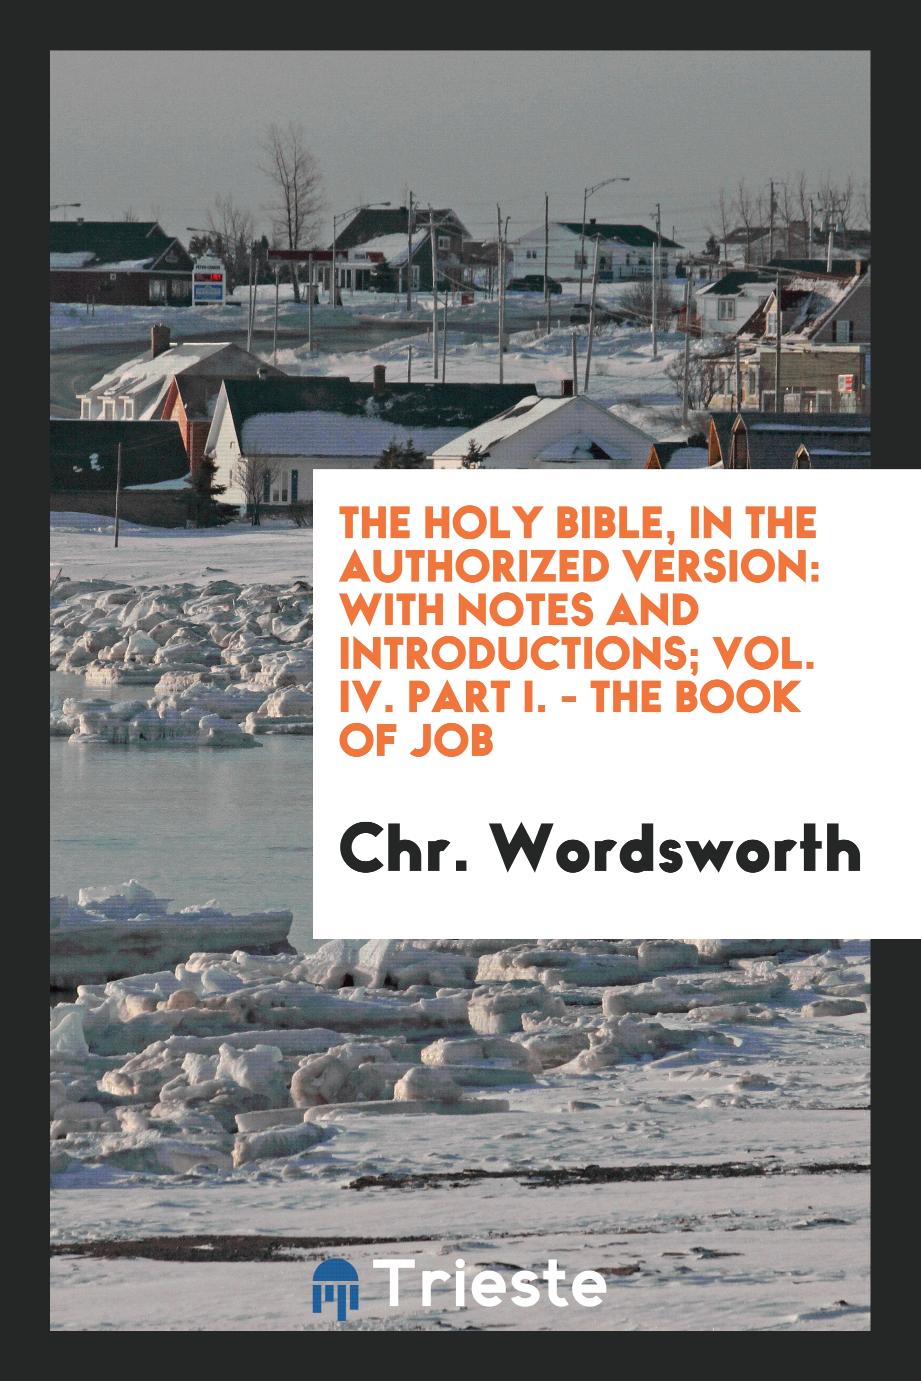 The Holy Bible, in the Authorized Version: With Notes and Introductions; Vol. IV. Part I. - the Book of Job